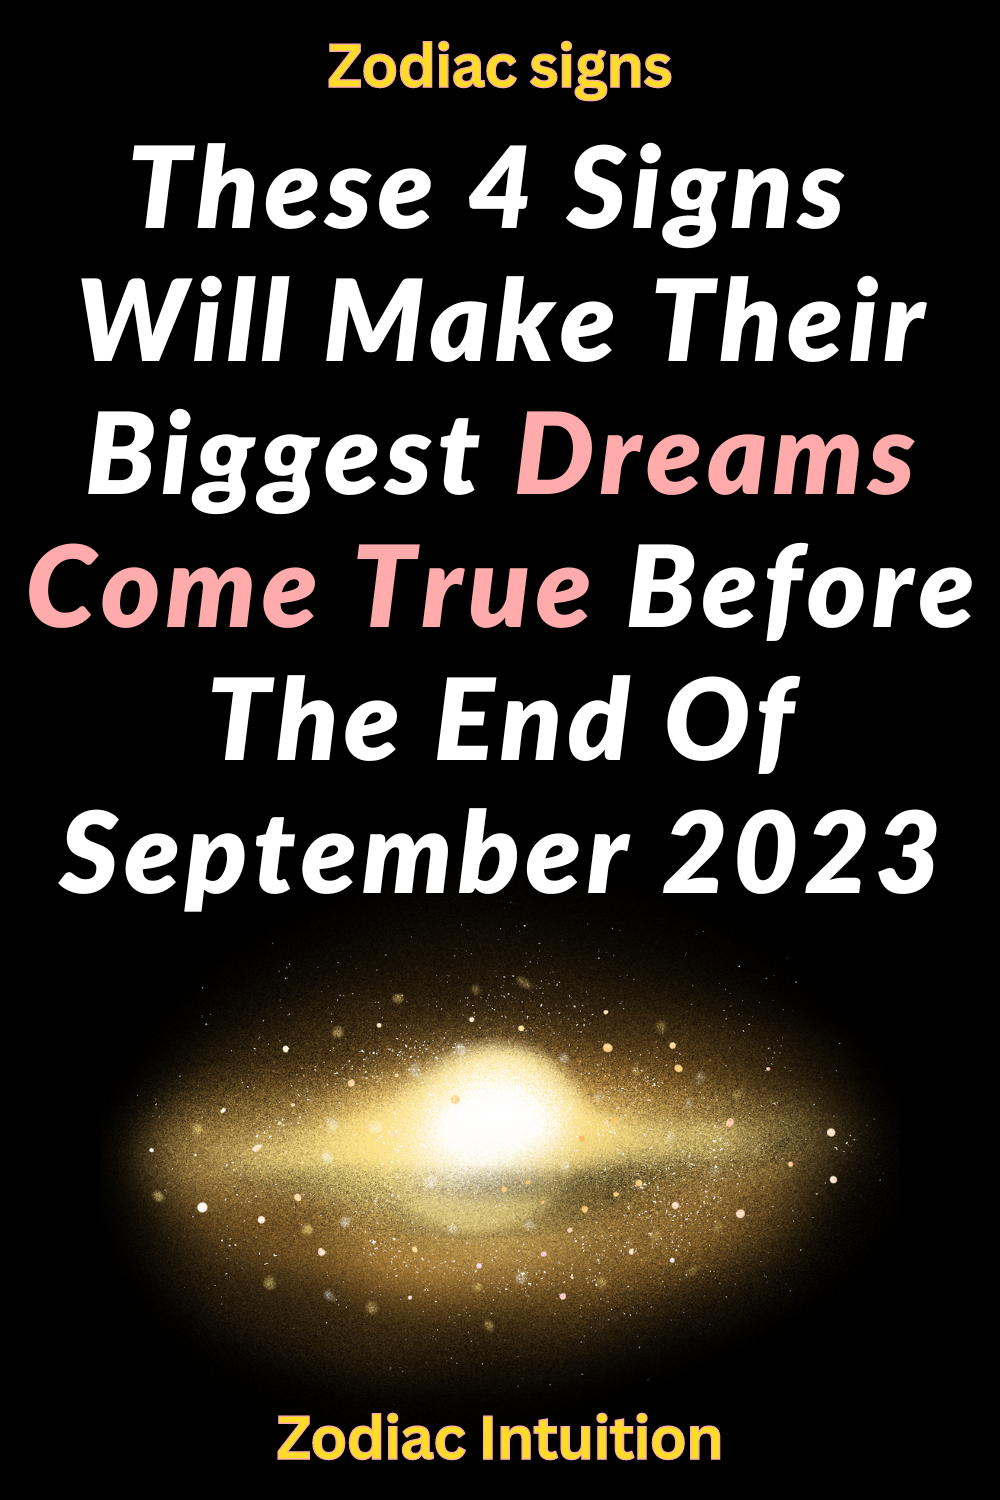 These 4 Signs Will Make Their Biggest Dreams Come True Before The End Of September 2023